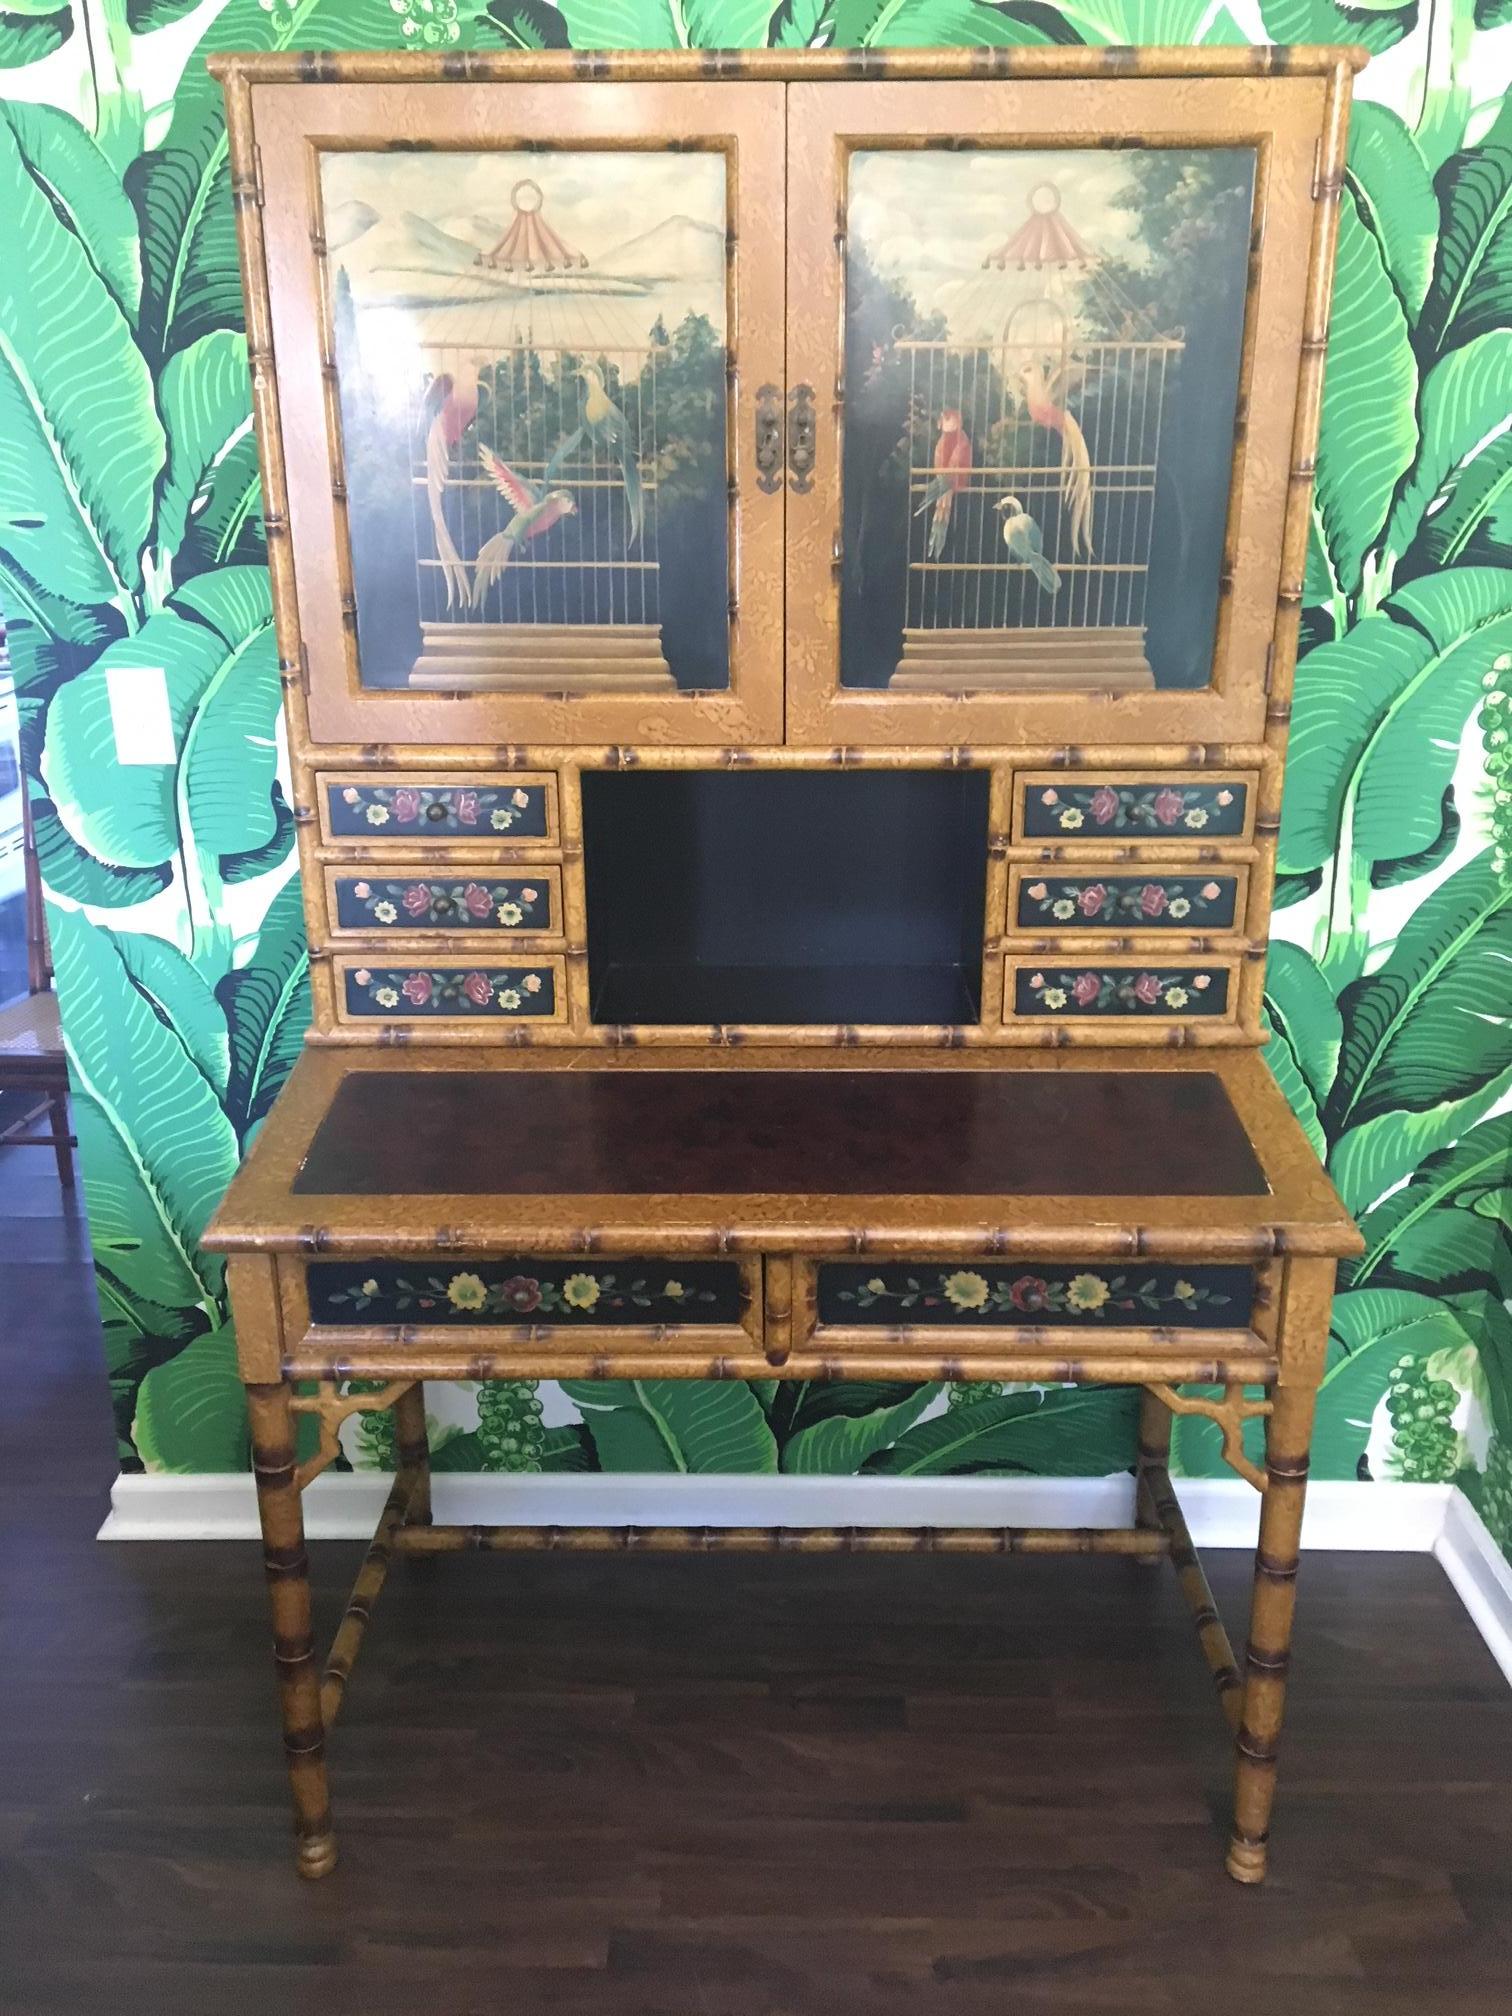 Asian chinoiserie faux bamboo desk with hutch and matching chair features hand-painted tropical motif. Leather embossed desk top and bronze hardware. Desk and hutch are two separate pieces. All pieces in good condition with minor cosmetic issues